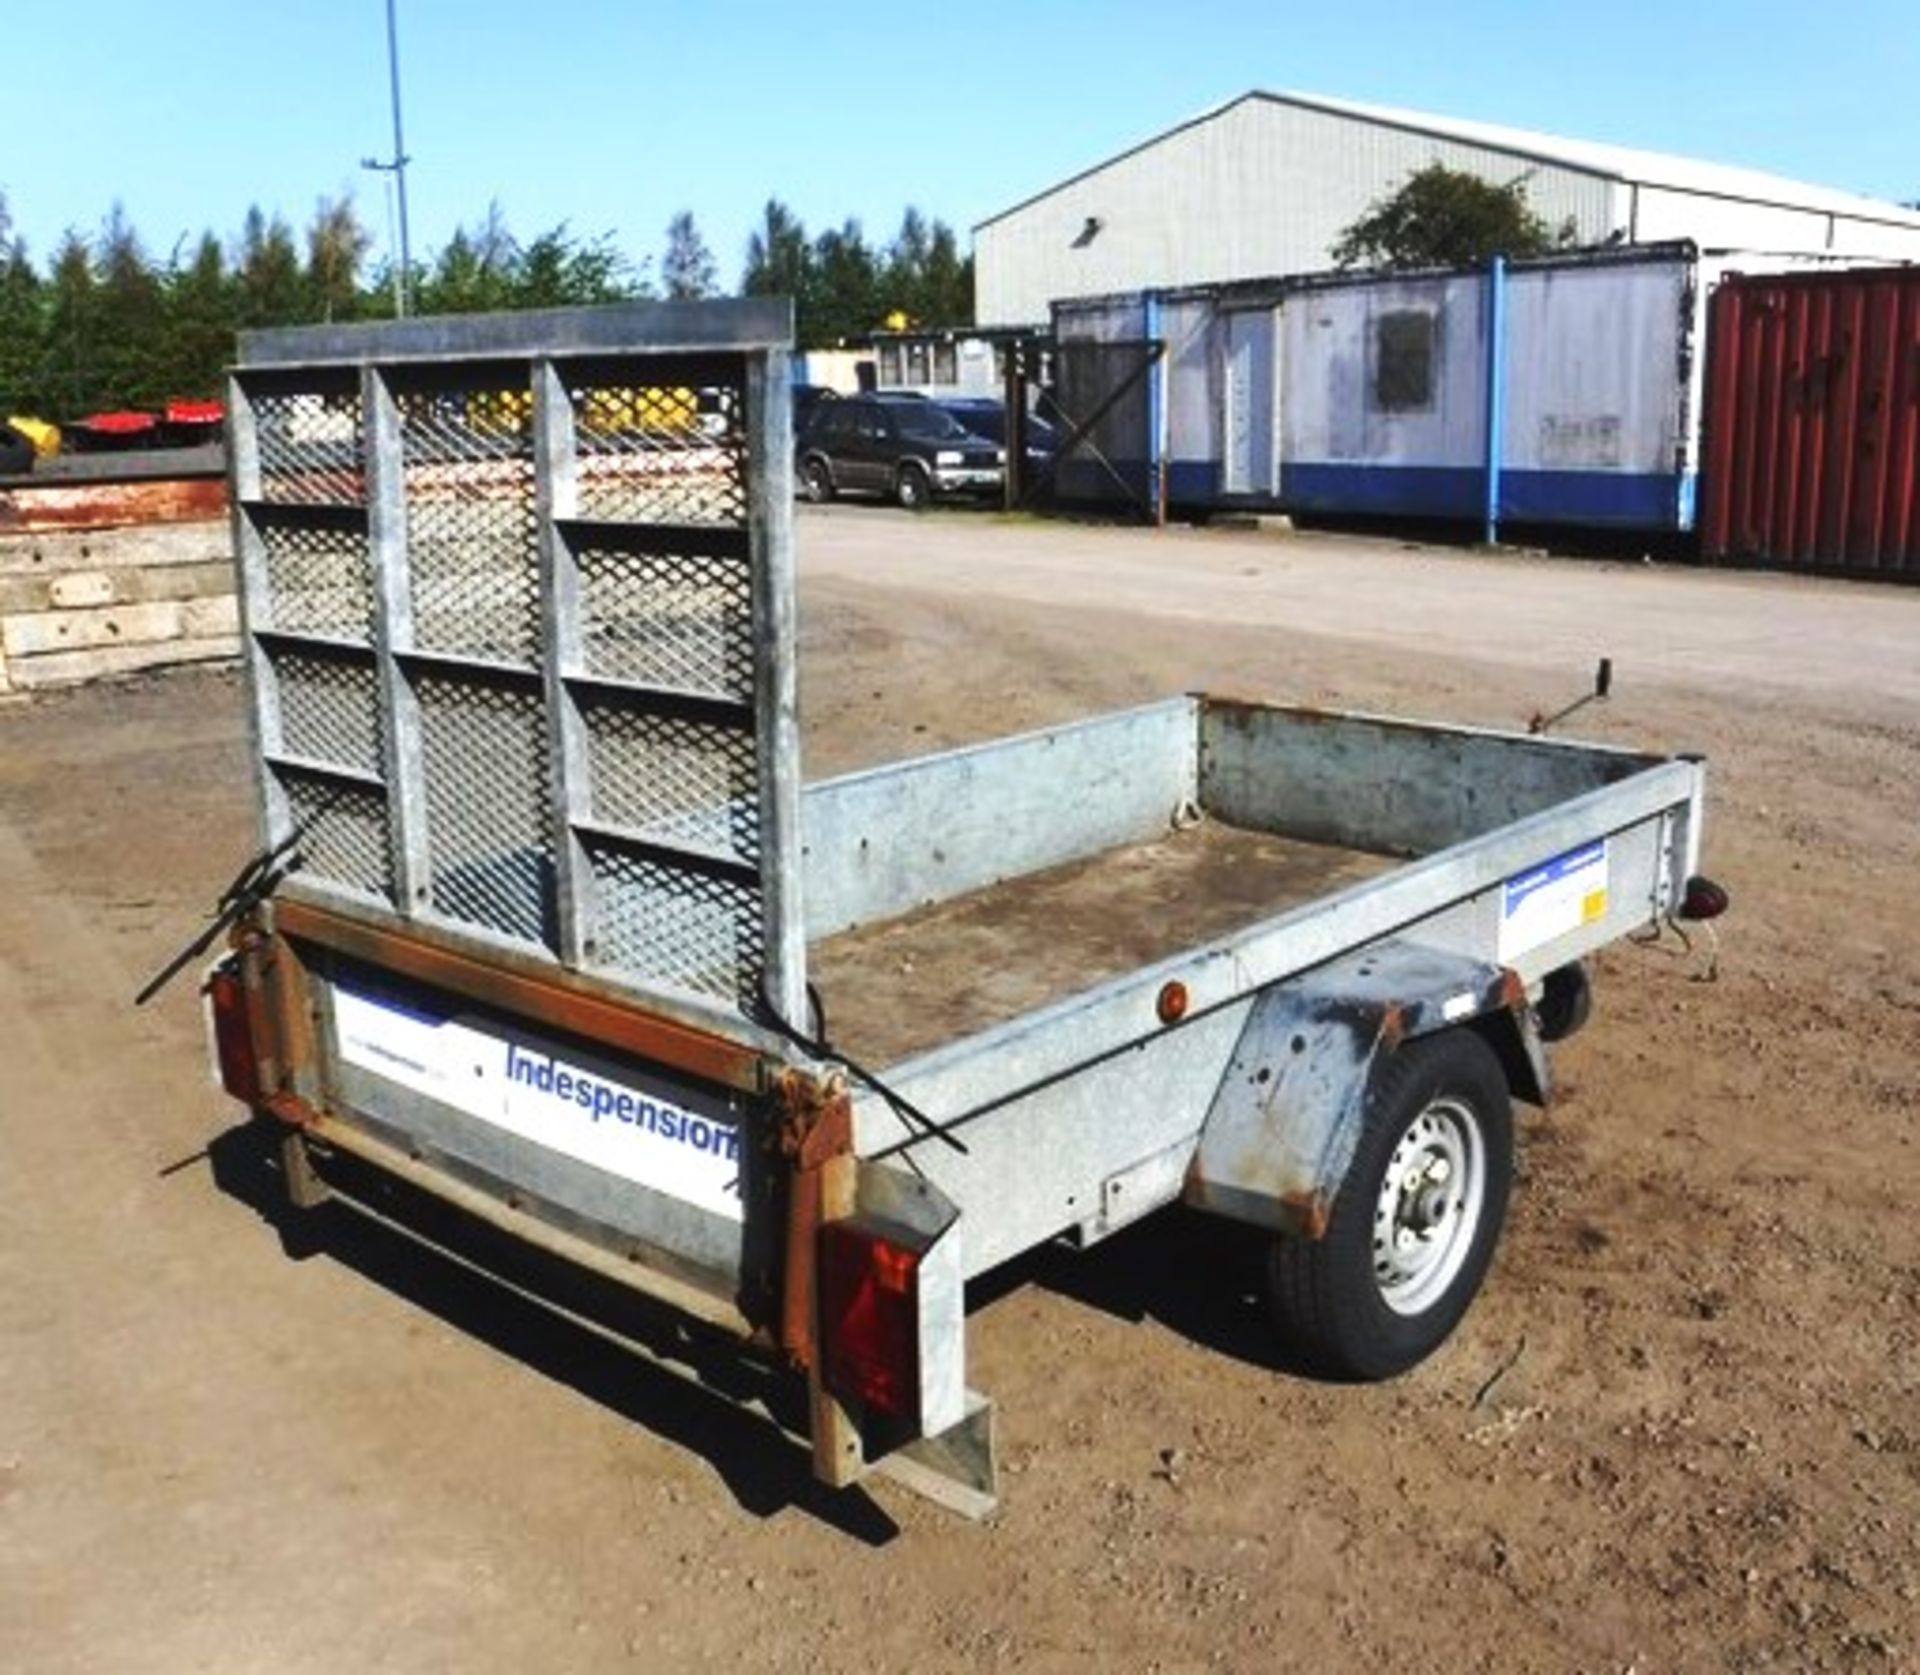 INDESPENSION single axle trailer. 8ft x 4ft with tail gate. Asset - 758-5132 - Image 9 of 13